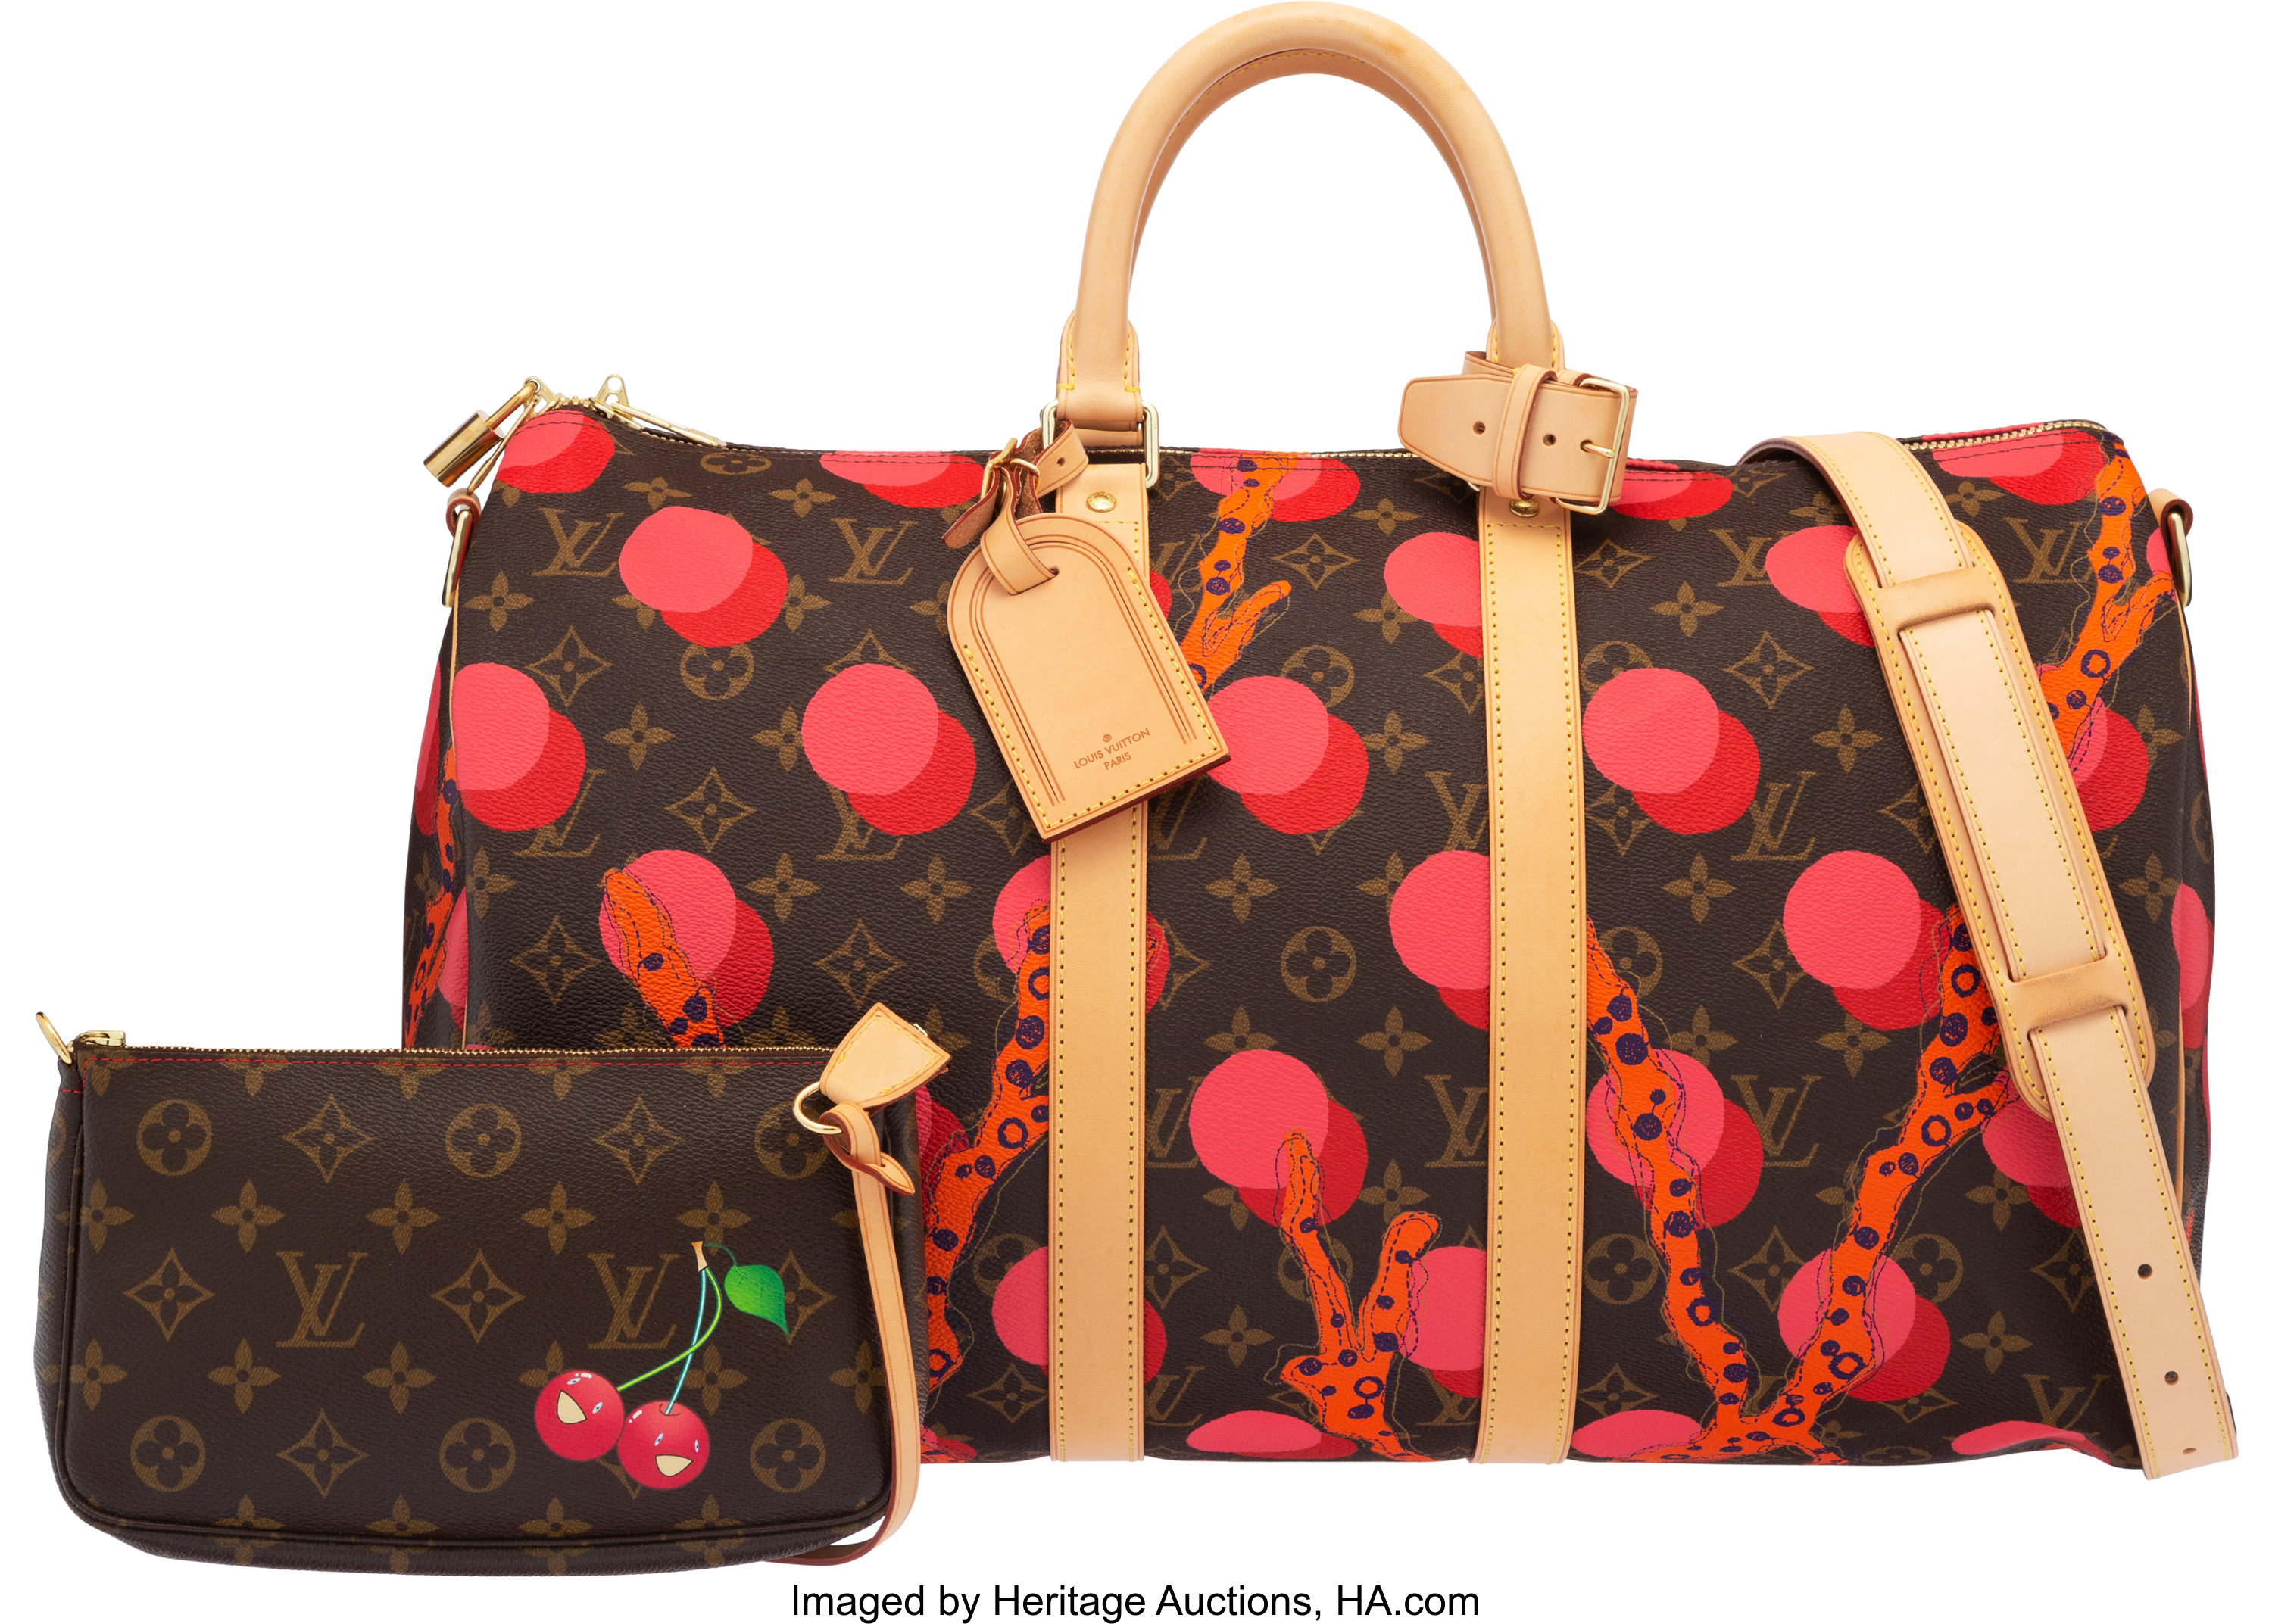 Vintage Louis Vuitton Cherry Limited Edition Murukami Cerise Keepall Travel  Duffle Bag - Shop Jewelry, Watches & Accessories